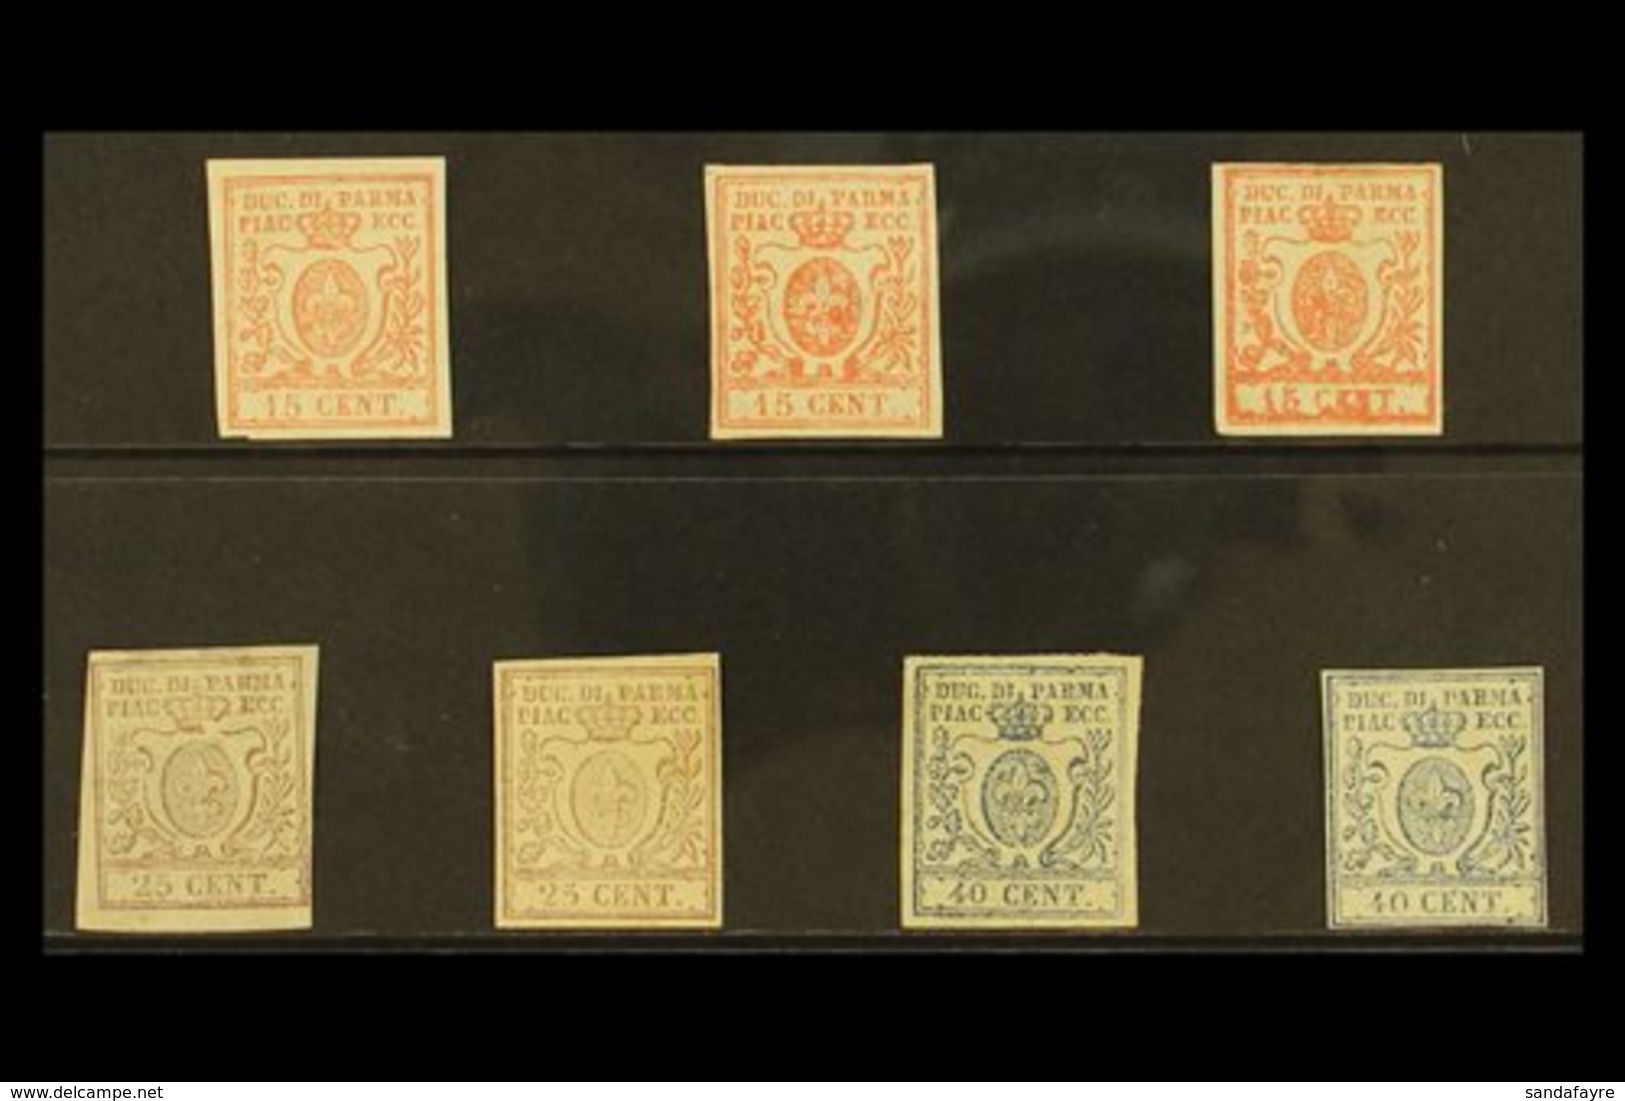 PARMA 1857 FINE UNUSED SELECTION Of The Fleur De Lis Issue Presented On A Stock Card. All With 4 Clear Margins & Without - Unclassified